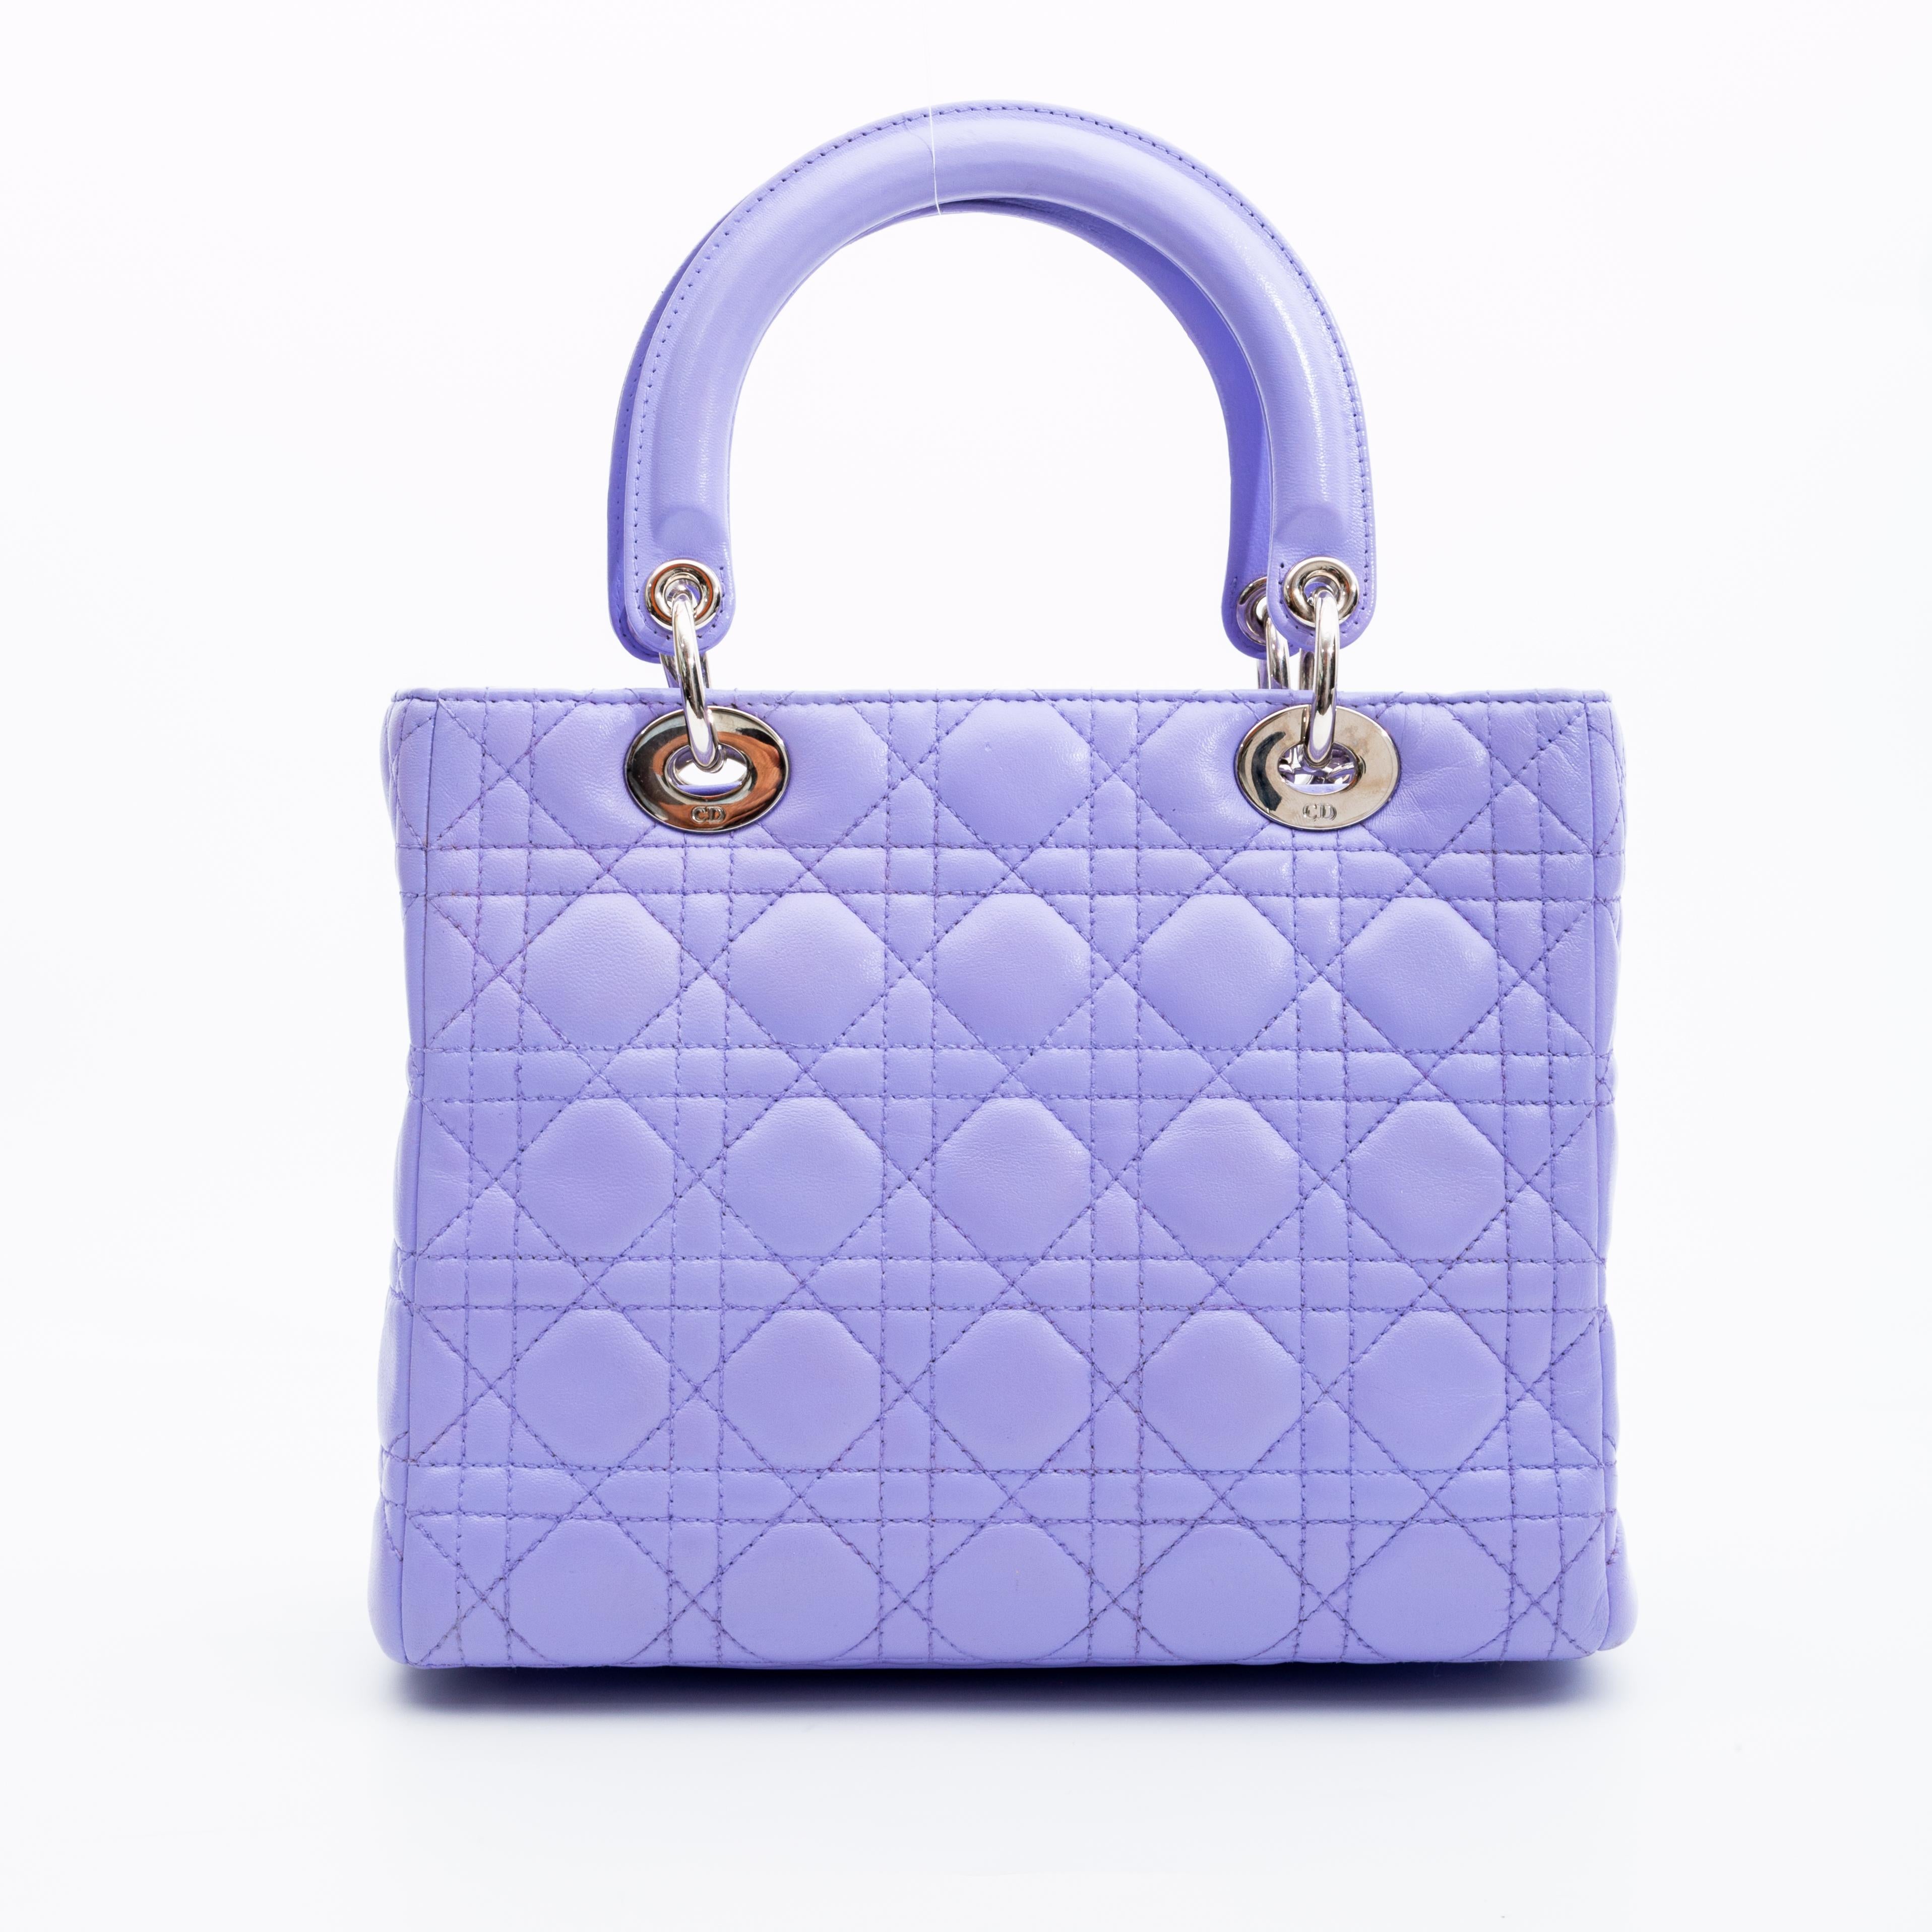 Only 60 bags made. Japanese exclusive.

COLOR: Lilac (light purple)
MATERIAL: Leather
ITEM CODE: 02-MA-0095
MEASURES: H 8” x L 9.5” x D 5”
DROP: 4” (top handles)
DROP: 16” (strap)
COMES WITH: 3rd party Authentication 
CONDITION: Good - faint